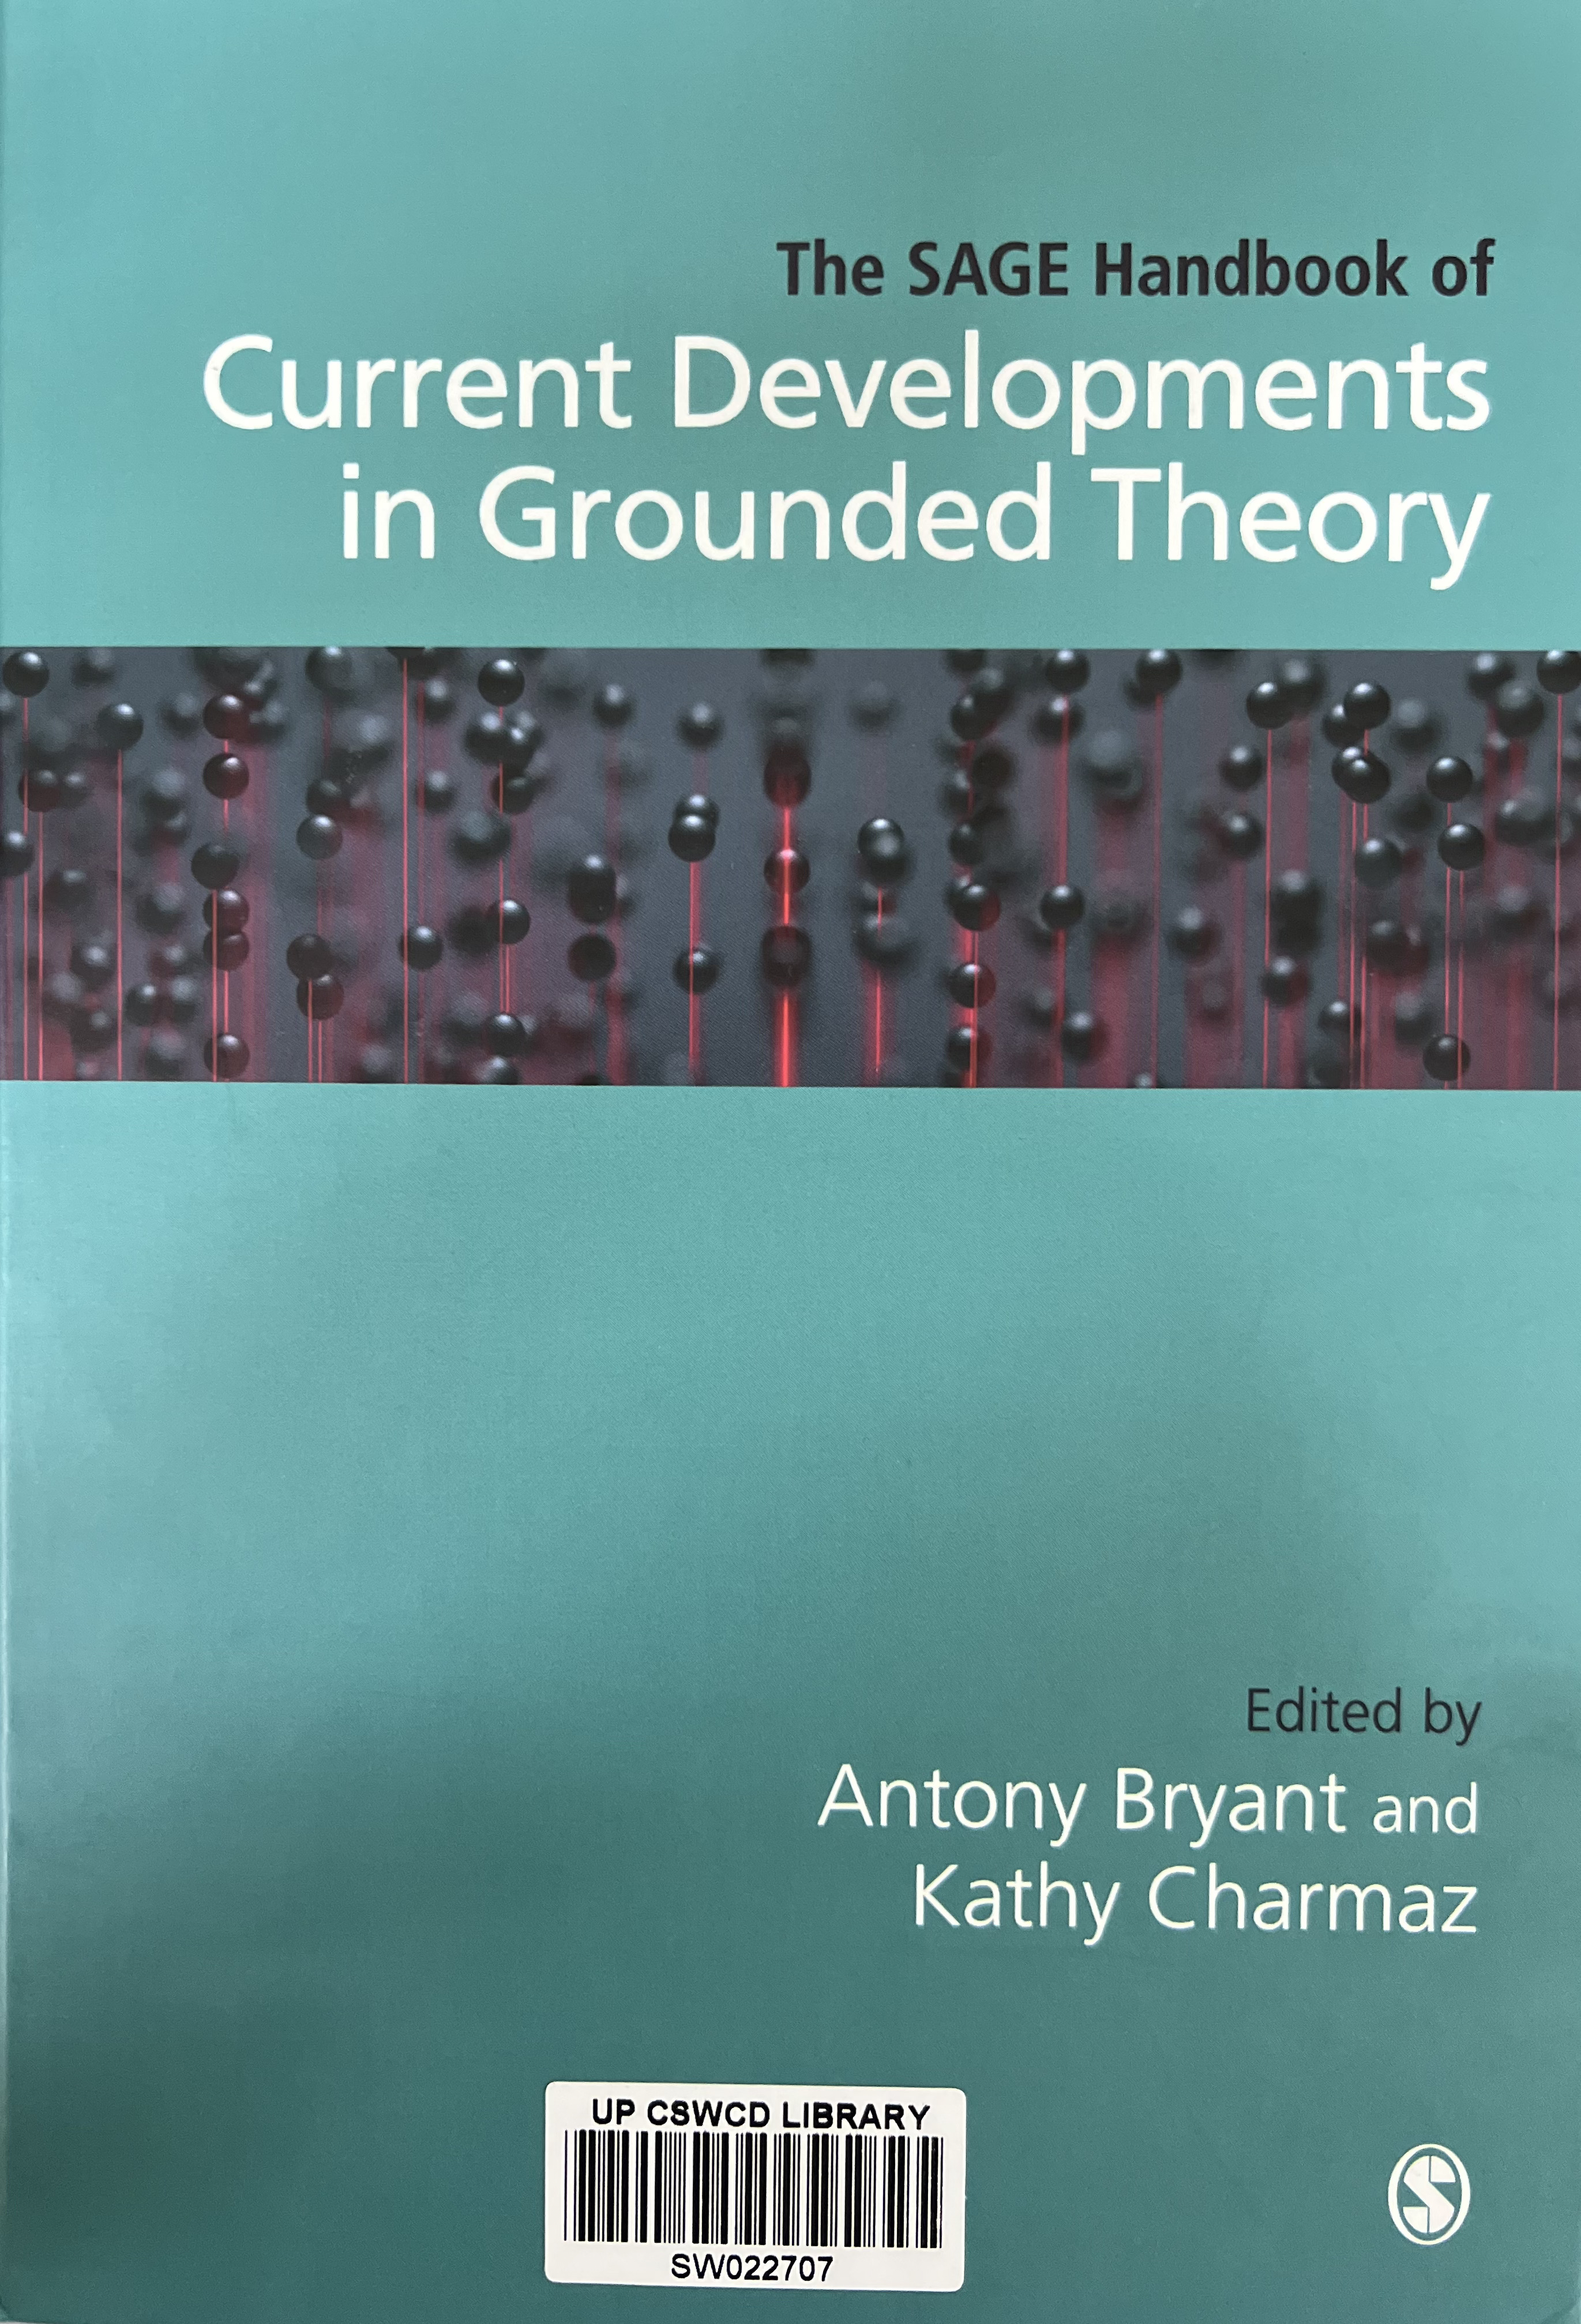 The SAGE handbook of current developments in grounded theory